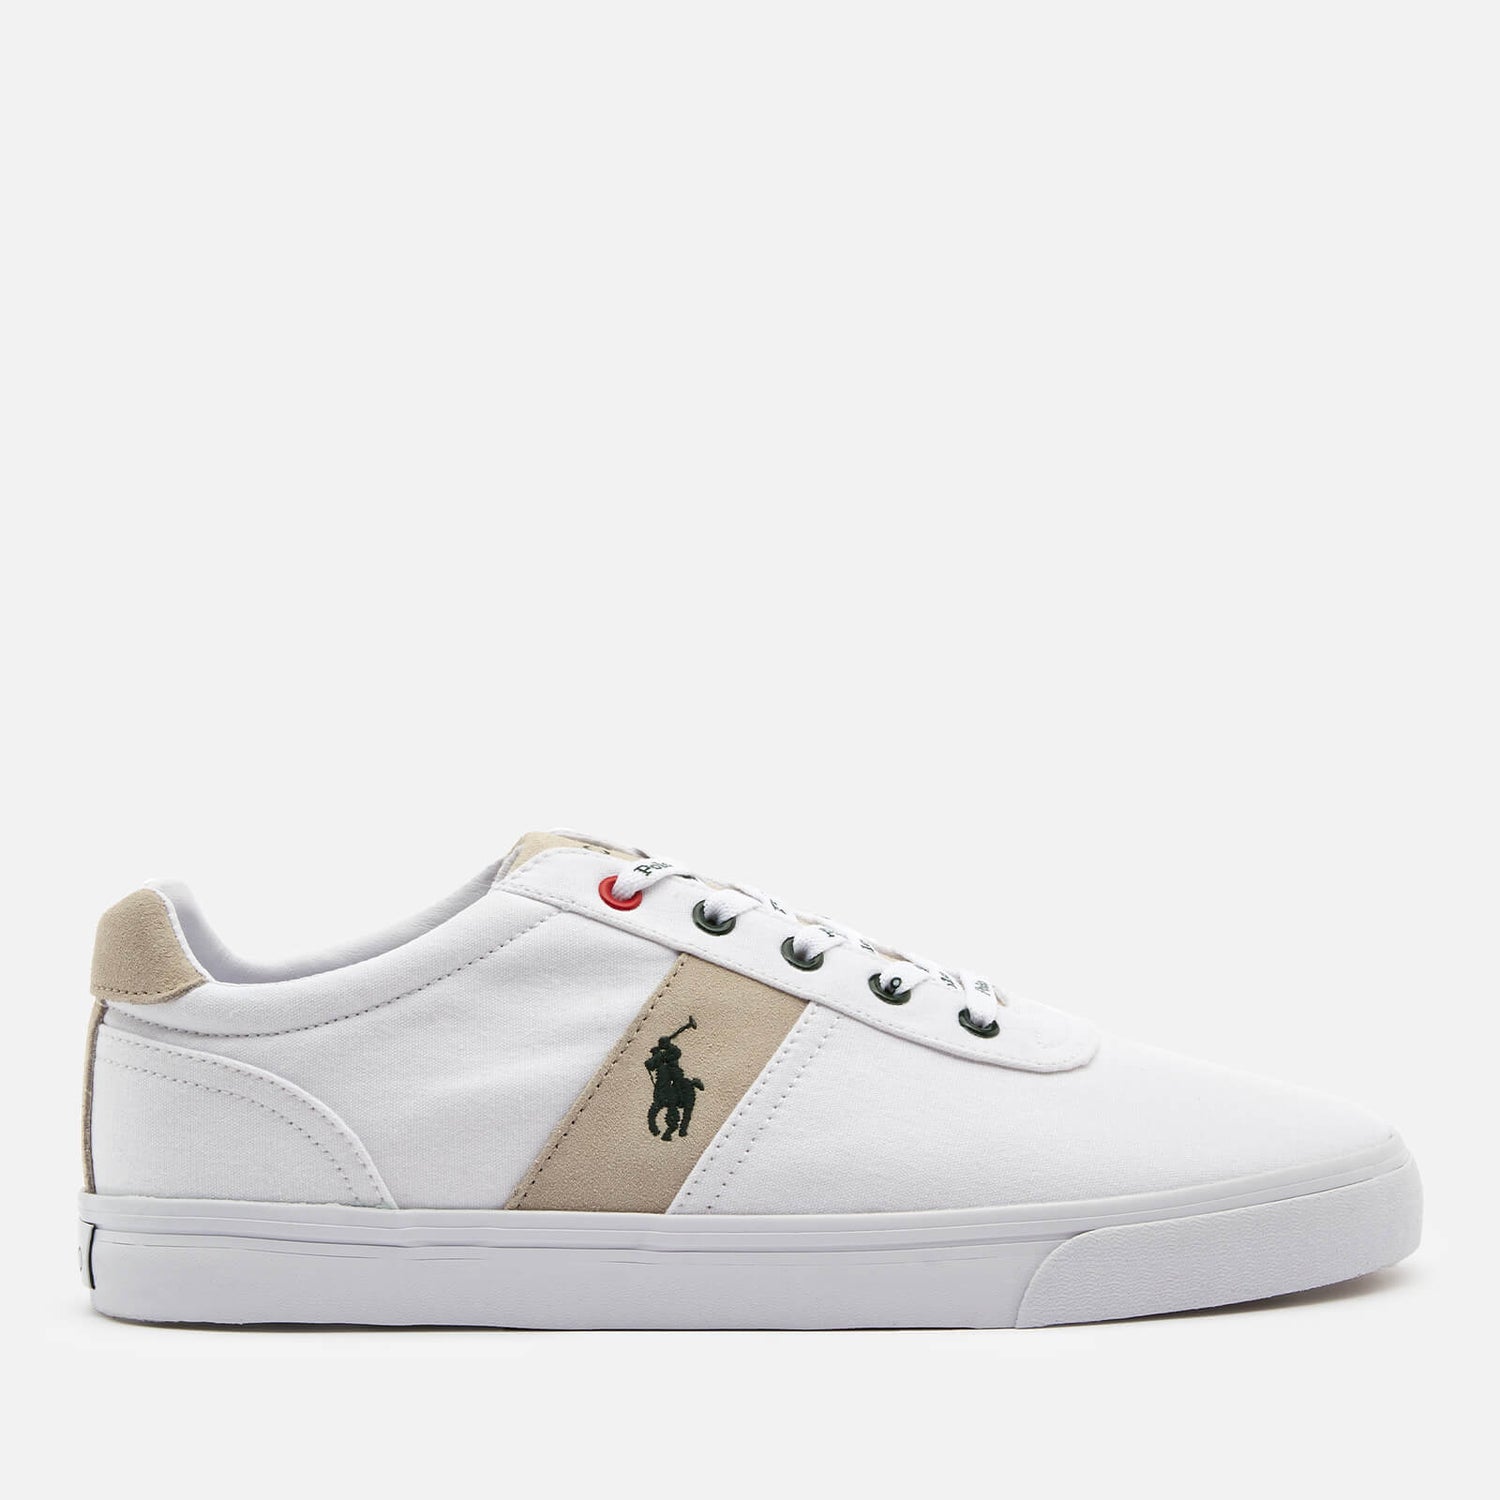 Polo Ralph Lauren Men's Hanford Sustainable Low Top Trainers - White/College Green